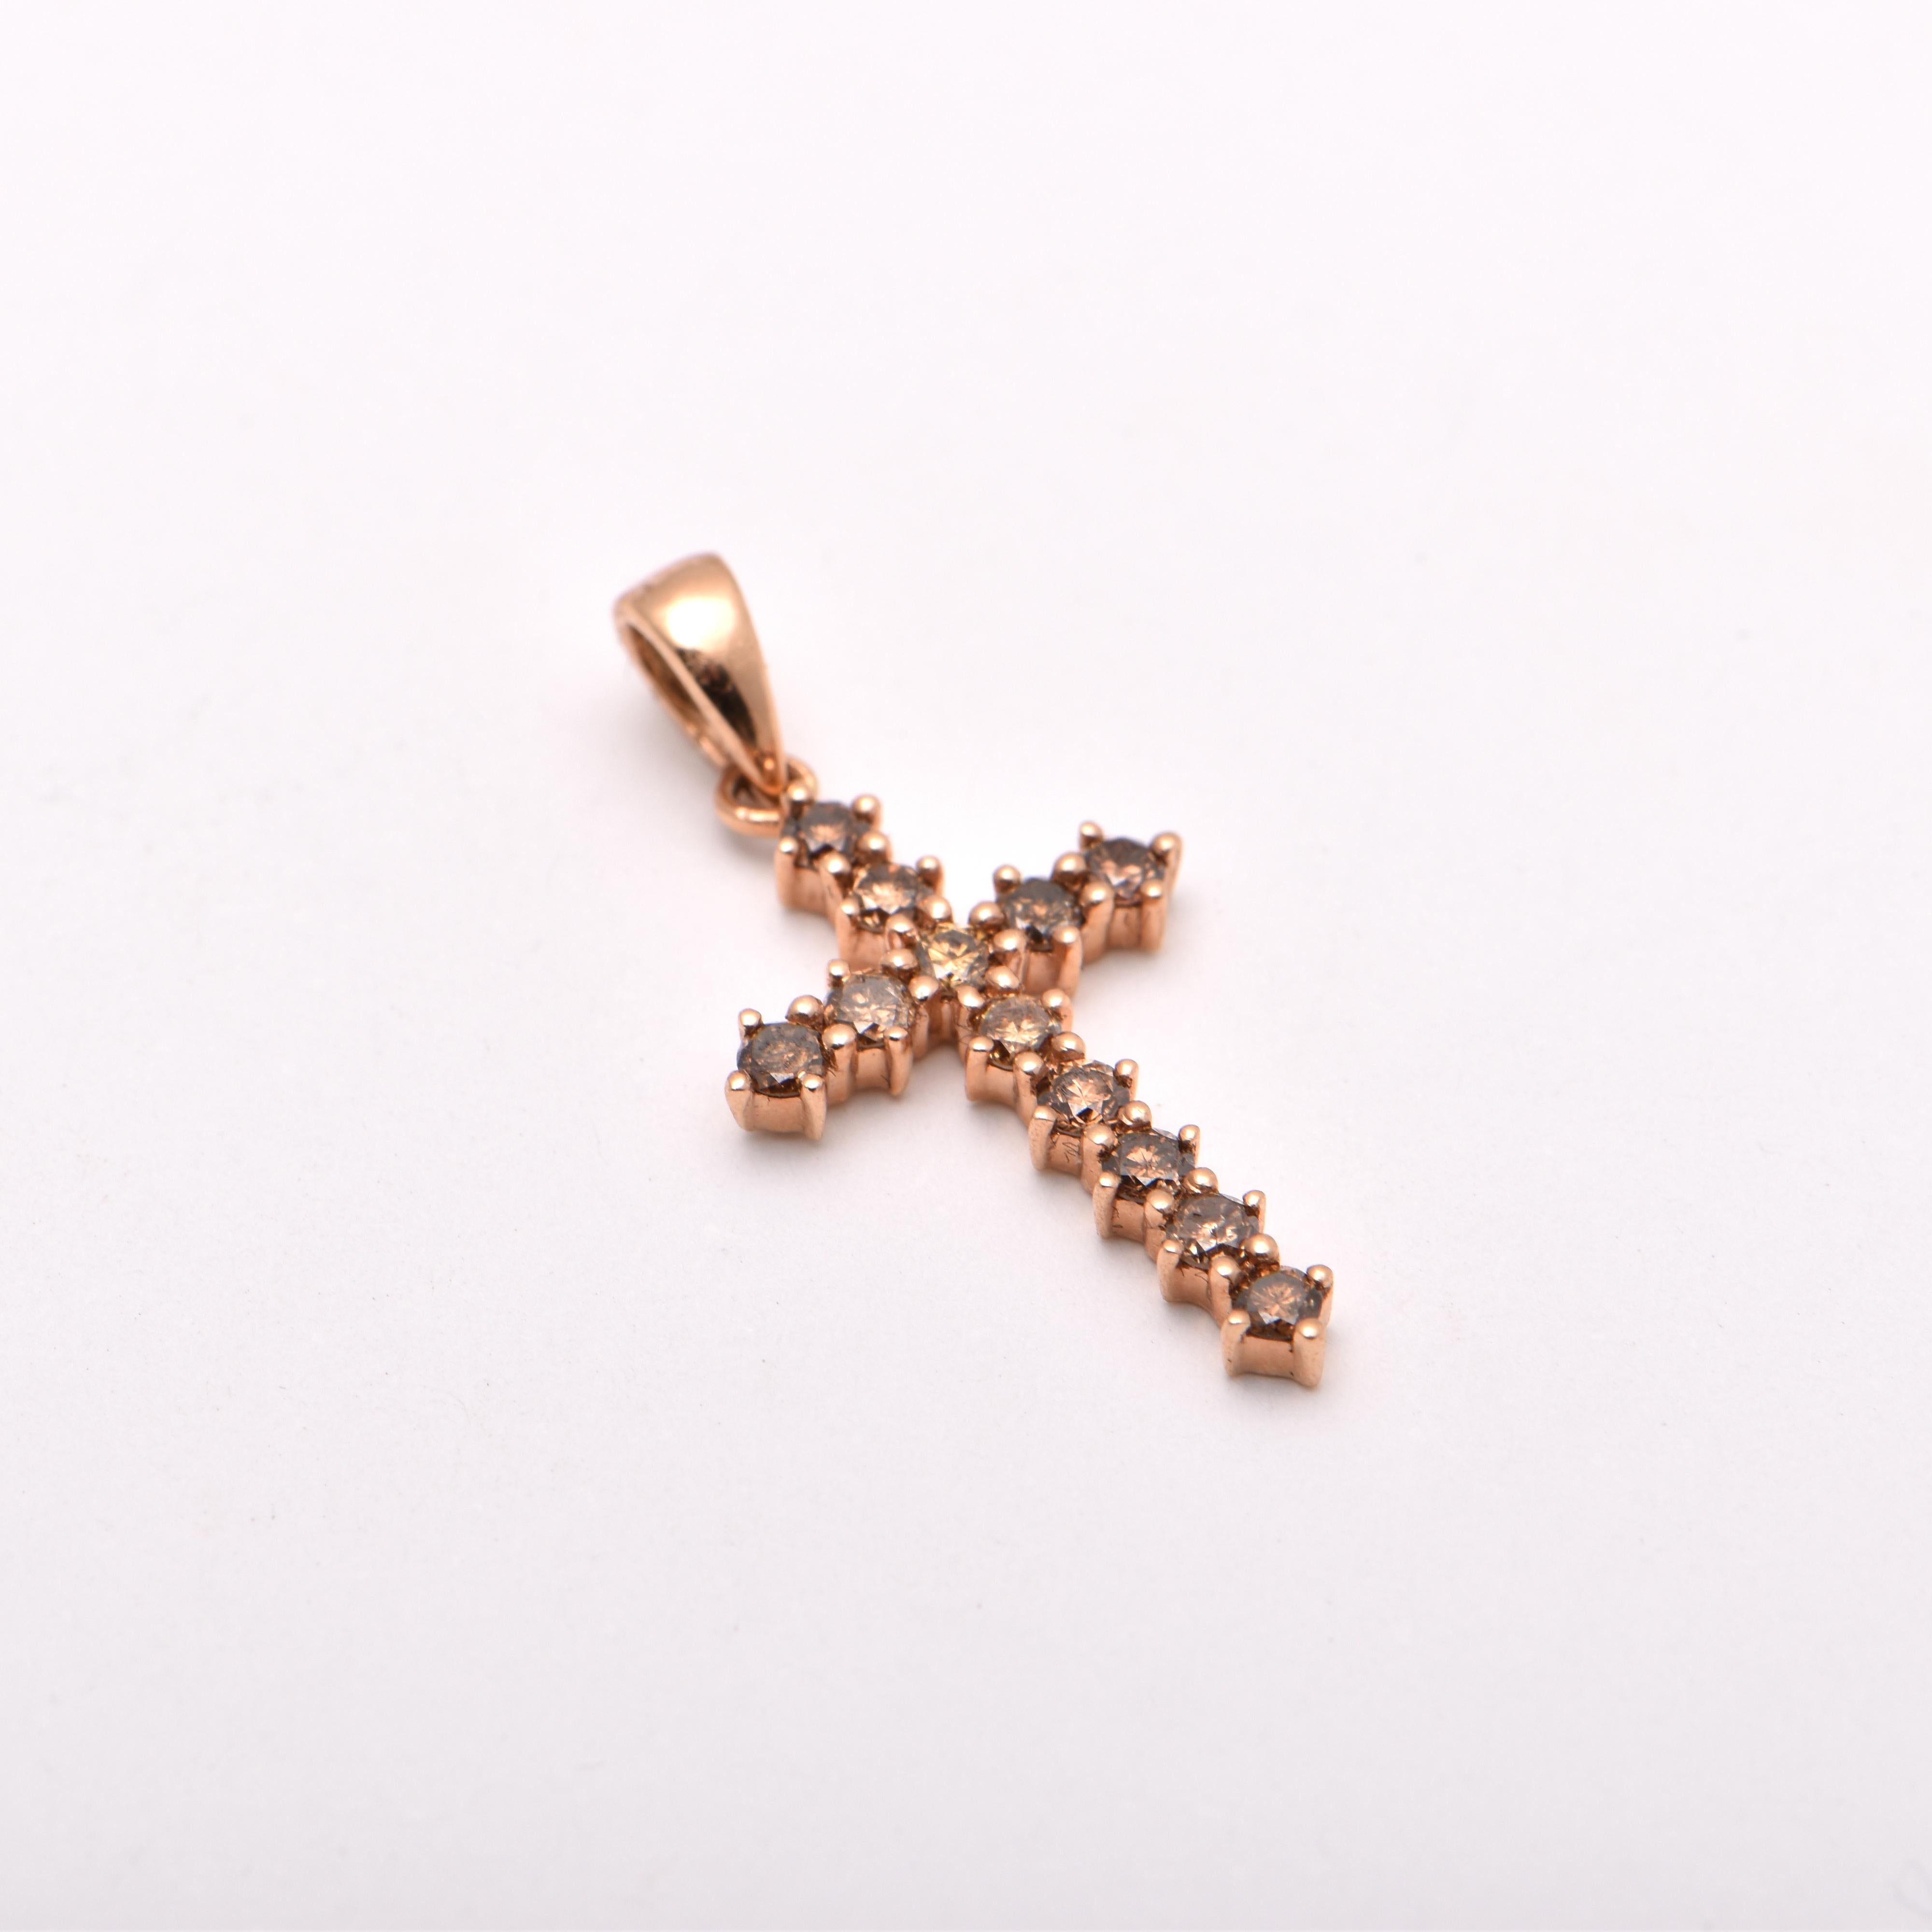 Diamond Cross Pendant; featuring 12 Round Brilliant Cut Brown diamonds totalling 0.37 Carats, set in 18ct Rose Gold (total 1.05 grams)   

*Chain not included

FREE express postage usually 3-4 days Sydney to New York  
FREE international insurance 